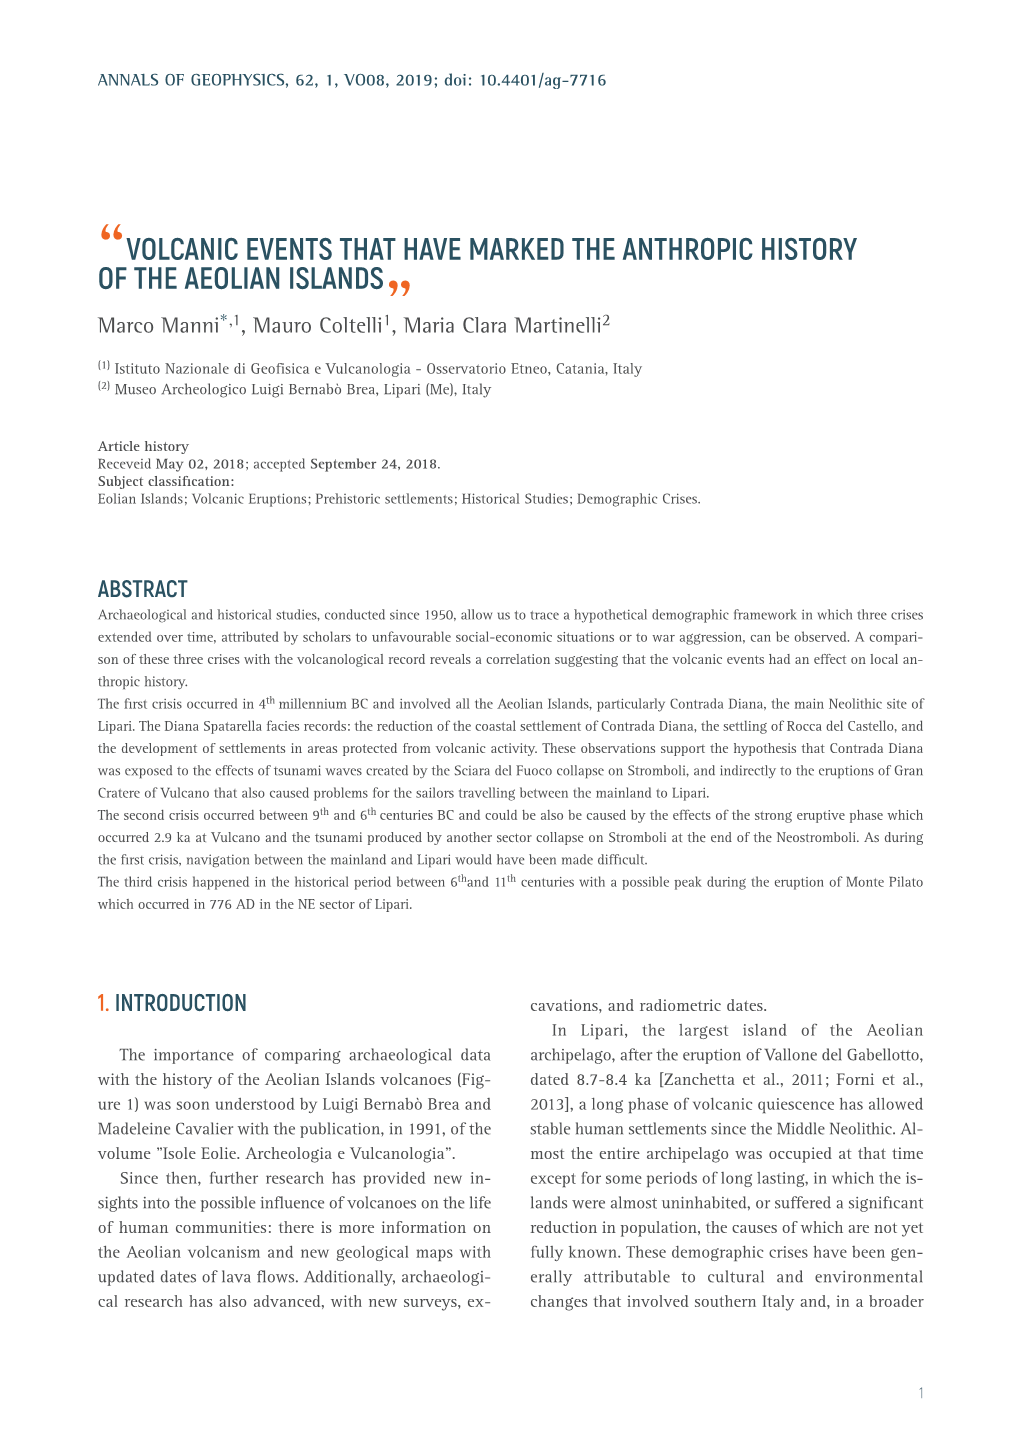 VOLCANIC EVENTS THAT HAVE MARKED the ANTHROPIC HISTORY OF“ the AEOLIAN ISLANDS„ Marco Manni*,1, Mauro Coltelli1, Maria Clara Martinelli2